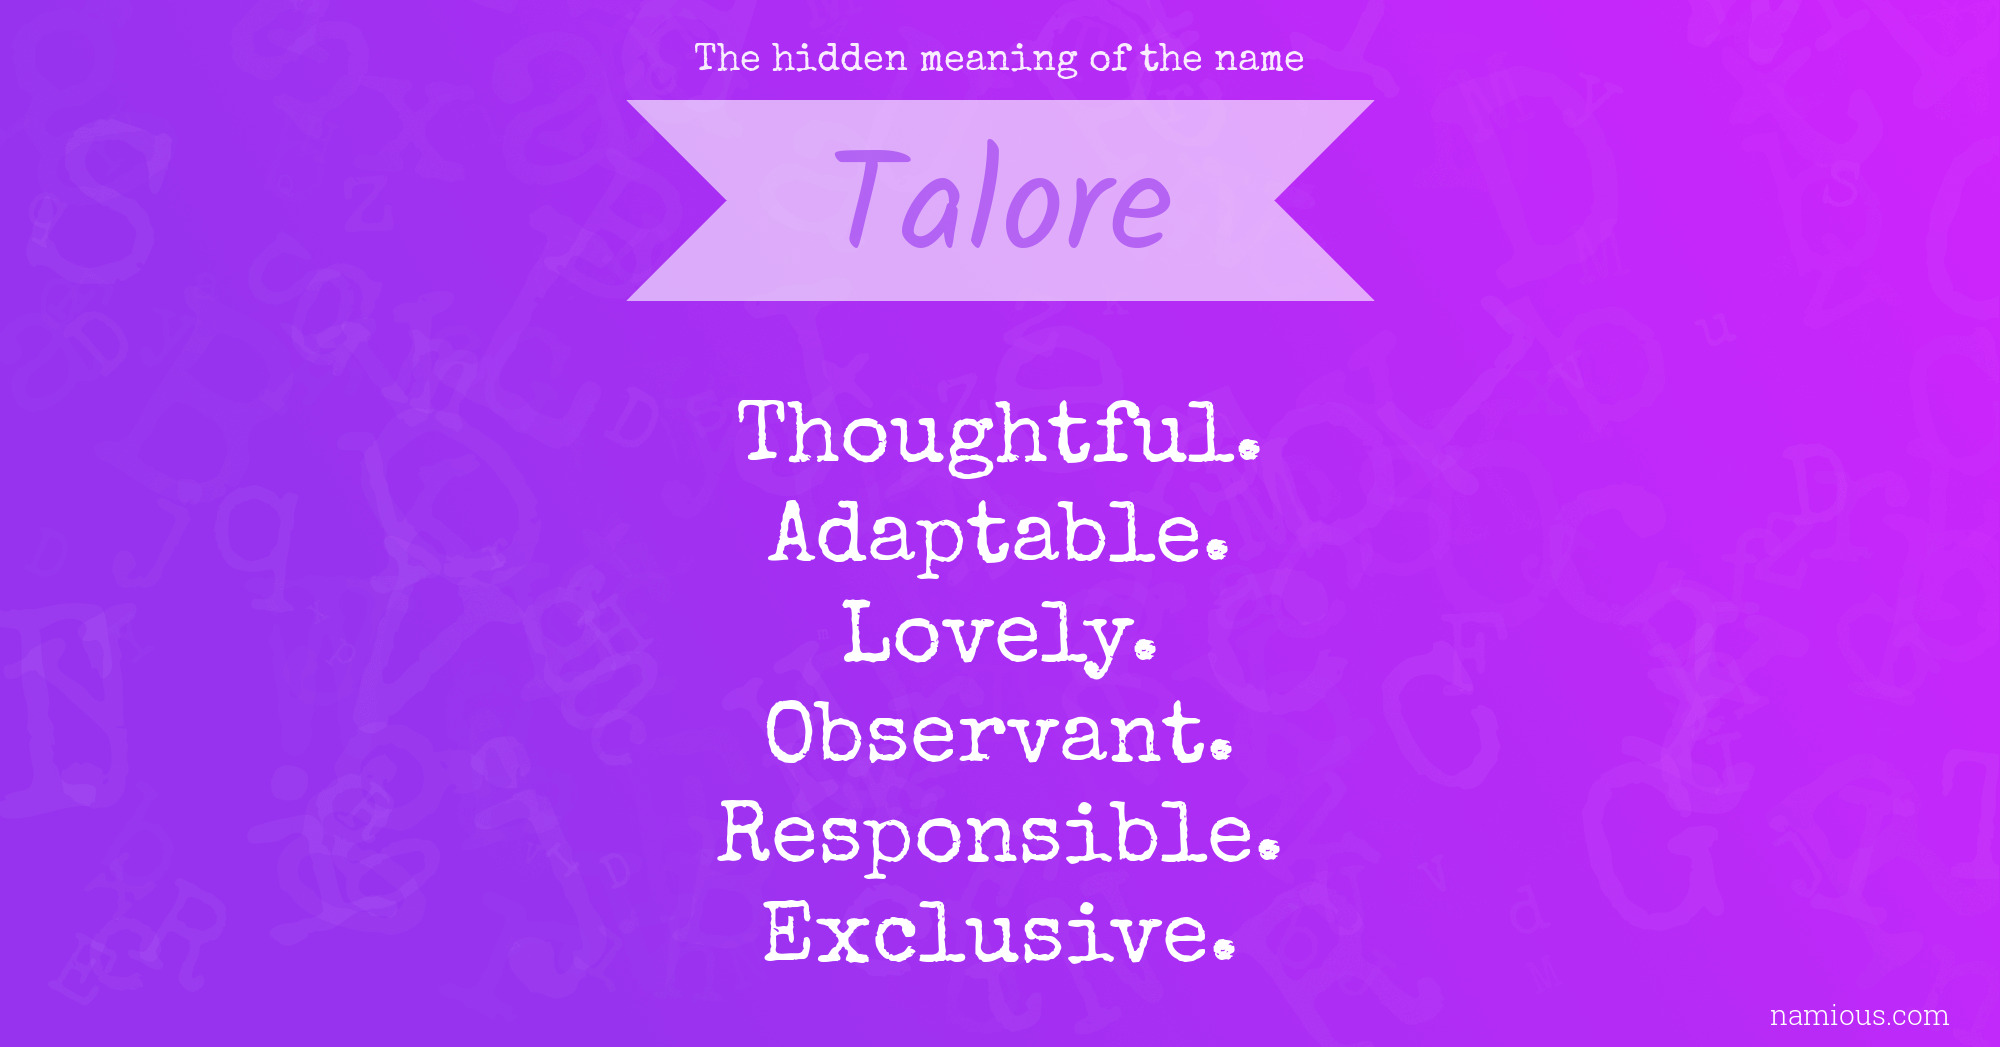 The hidden meaning of the name Talore